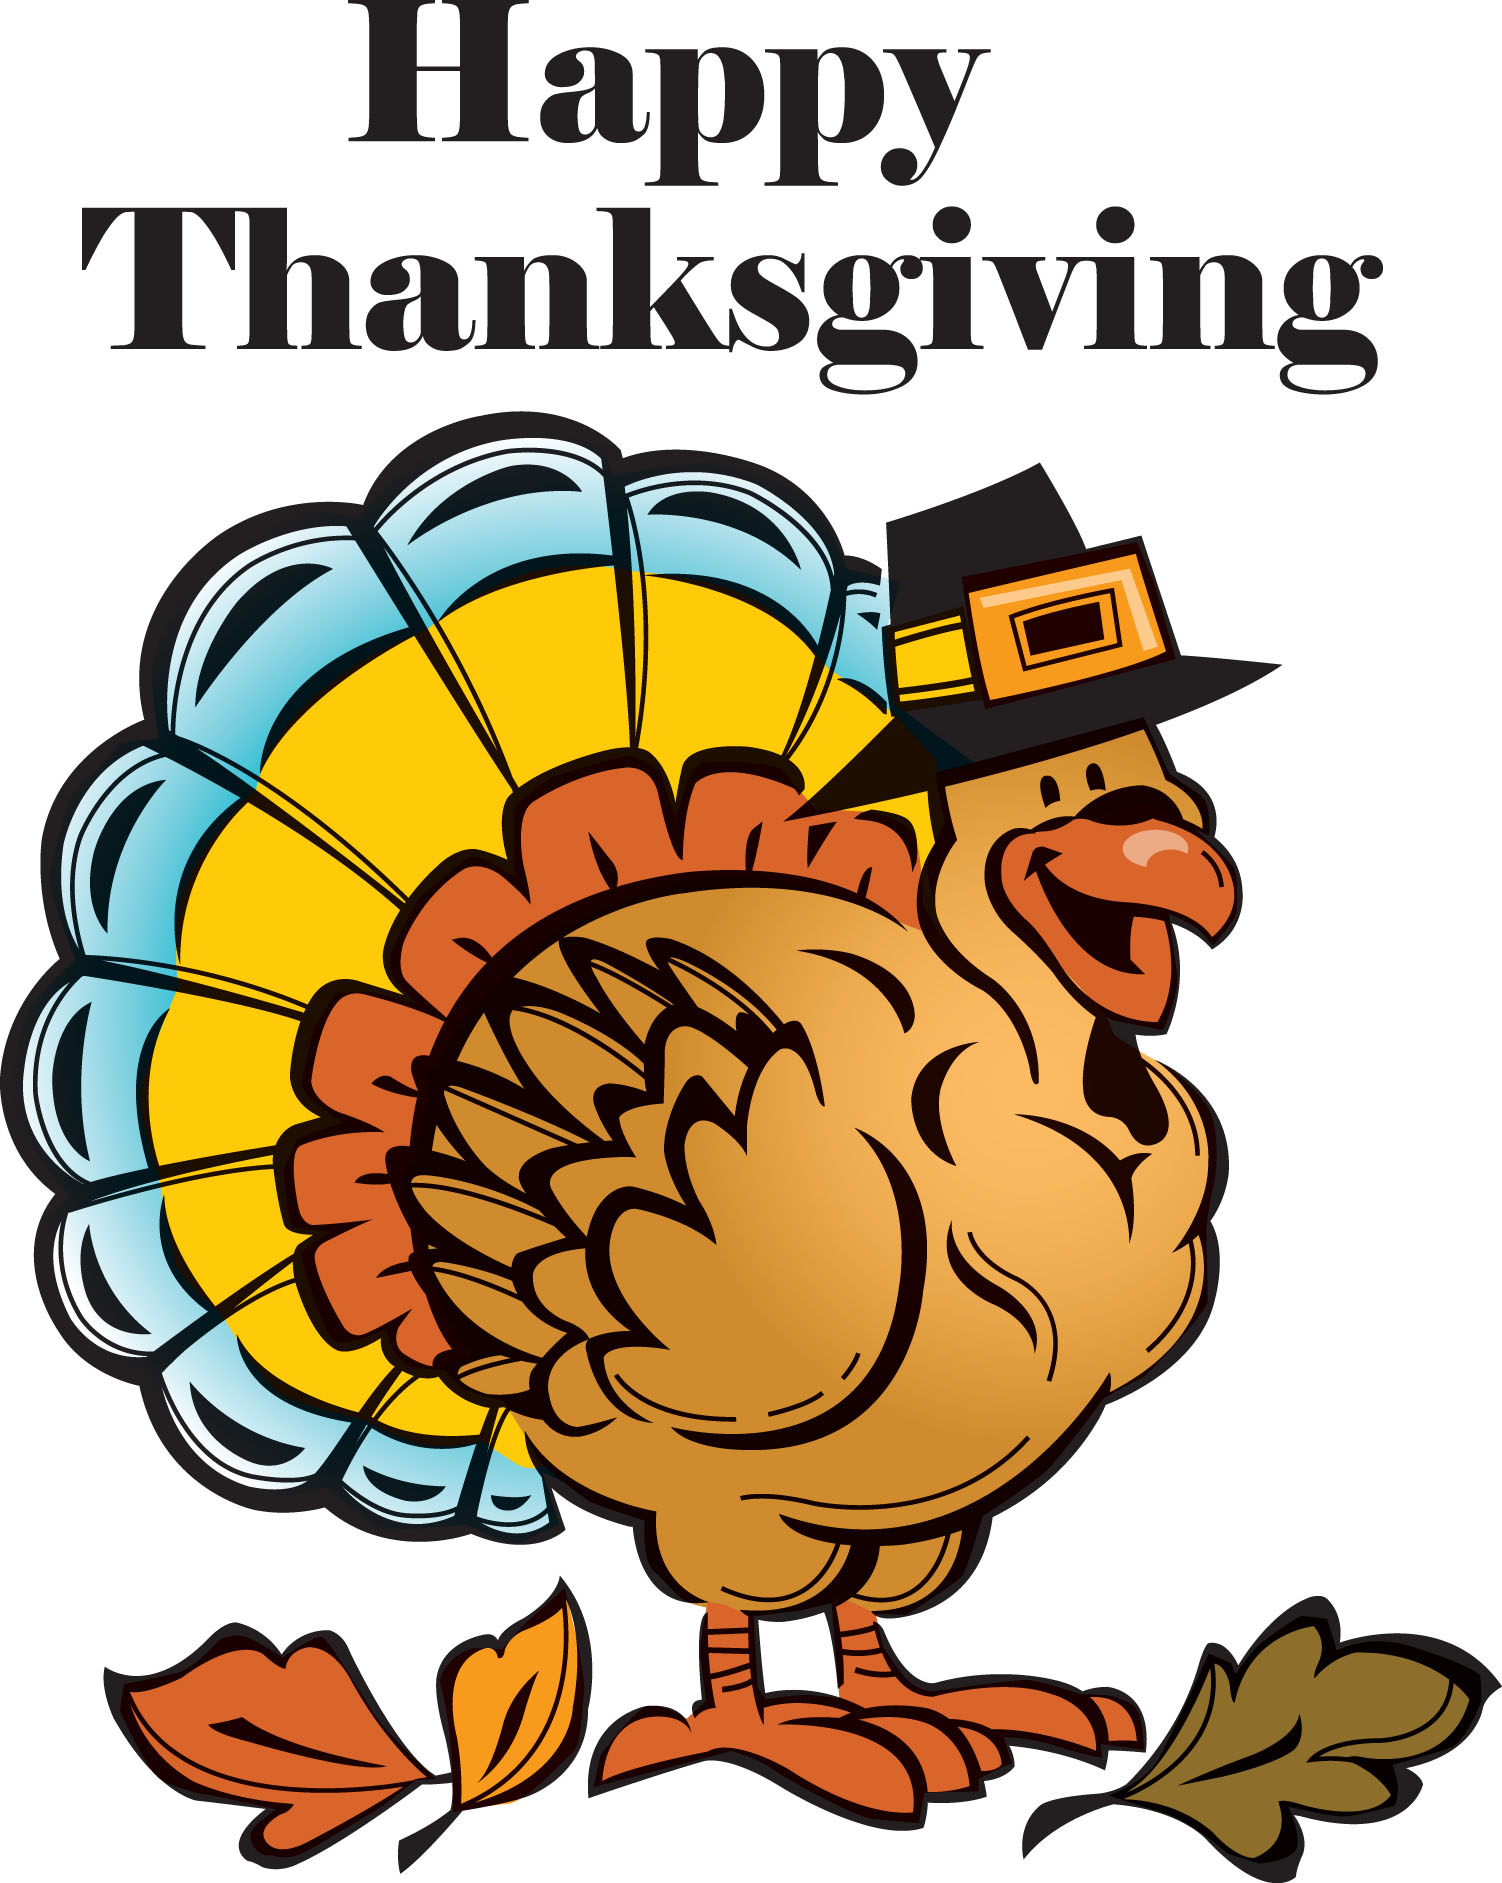 Pictures Of Thanksgiving Food - ClipArt Best